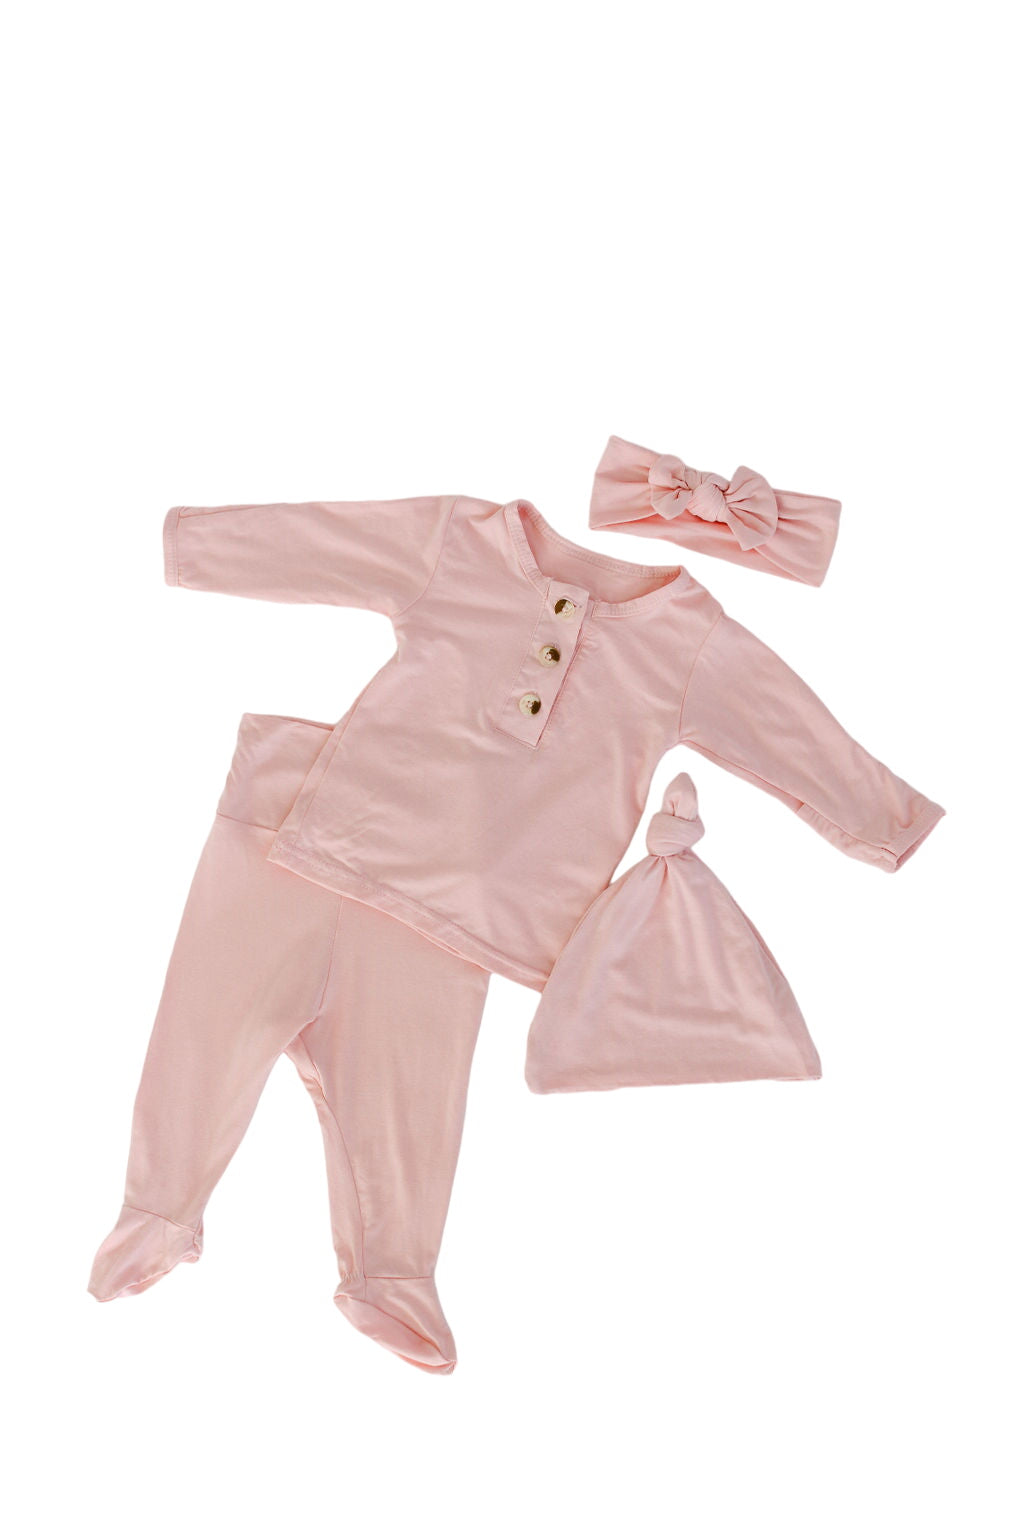 Top And Bottom Outfit, Hat And Headband Set (newborn - 12 Months) - Pink